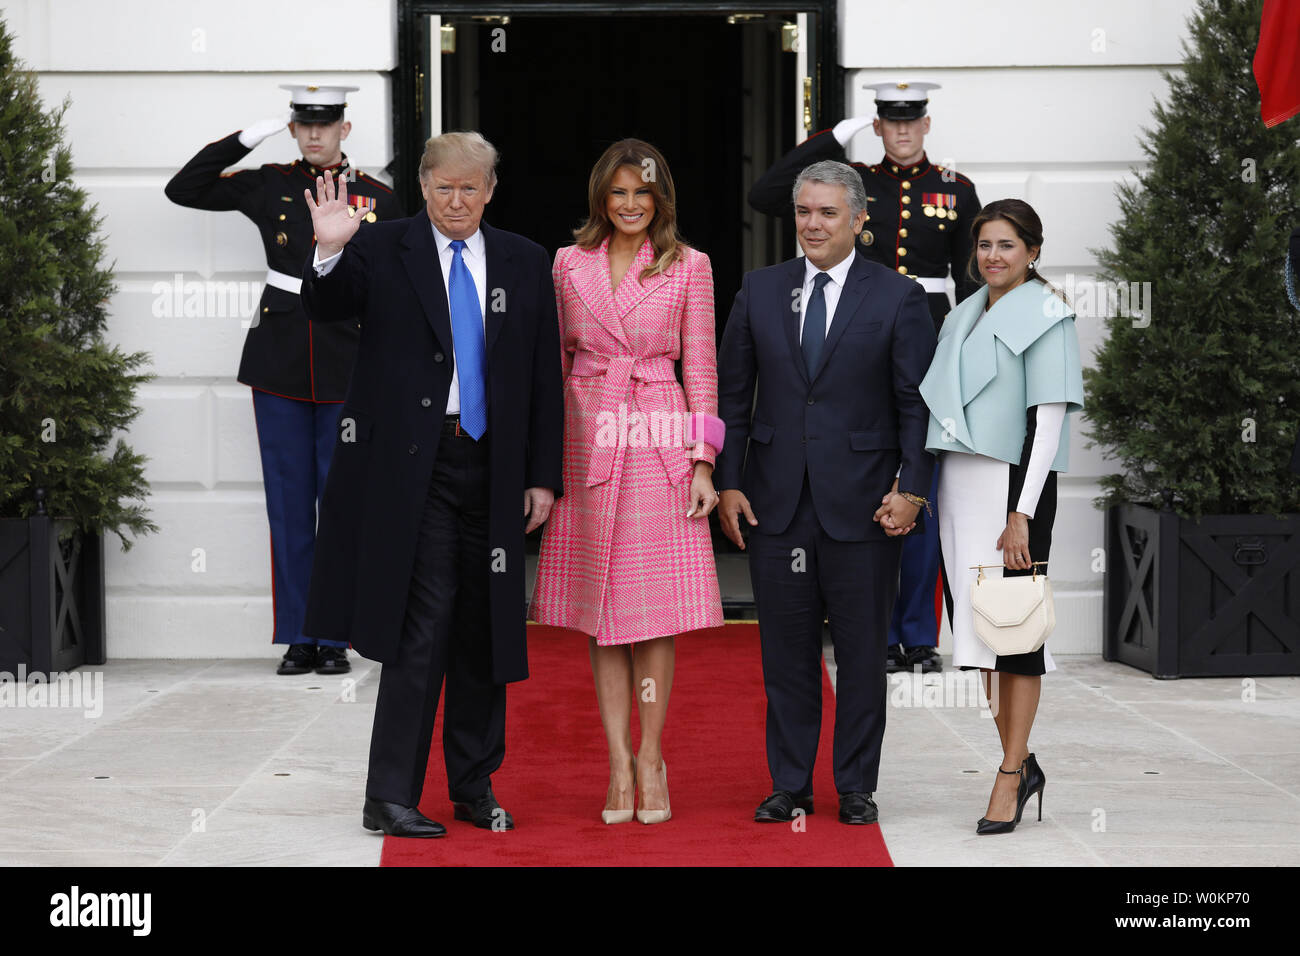 U.S. President Donald Trump (L) and First Lady Melania Trump welcome Colombian President Ivan Duque Marquez and Mrs. Ruiz Sandoval at the White House in Washington on February 13, 2019. Photo by Yuri Gripas/UPI Stock Photo